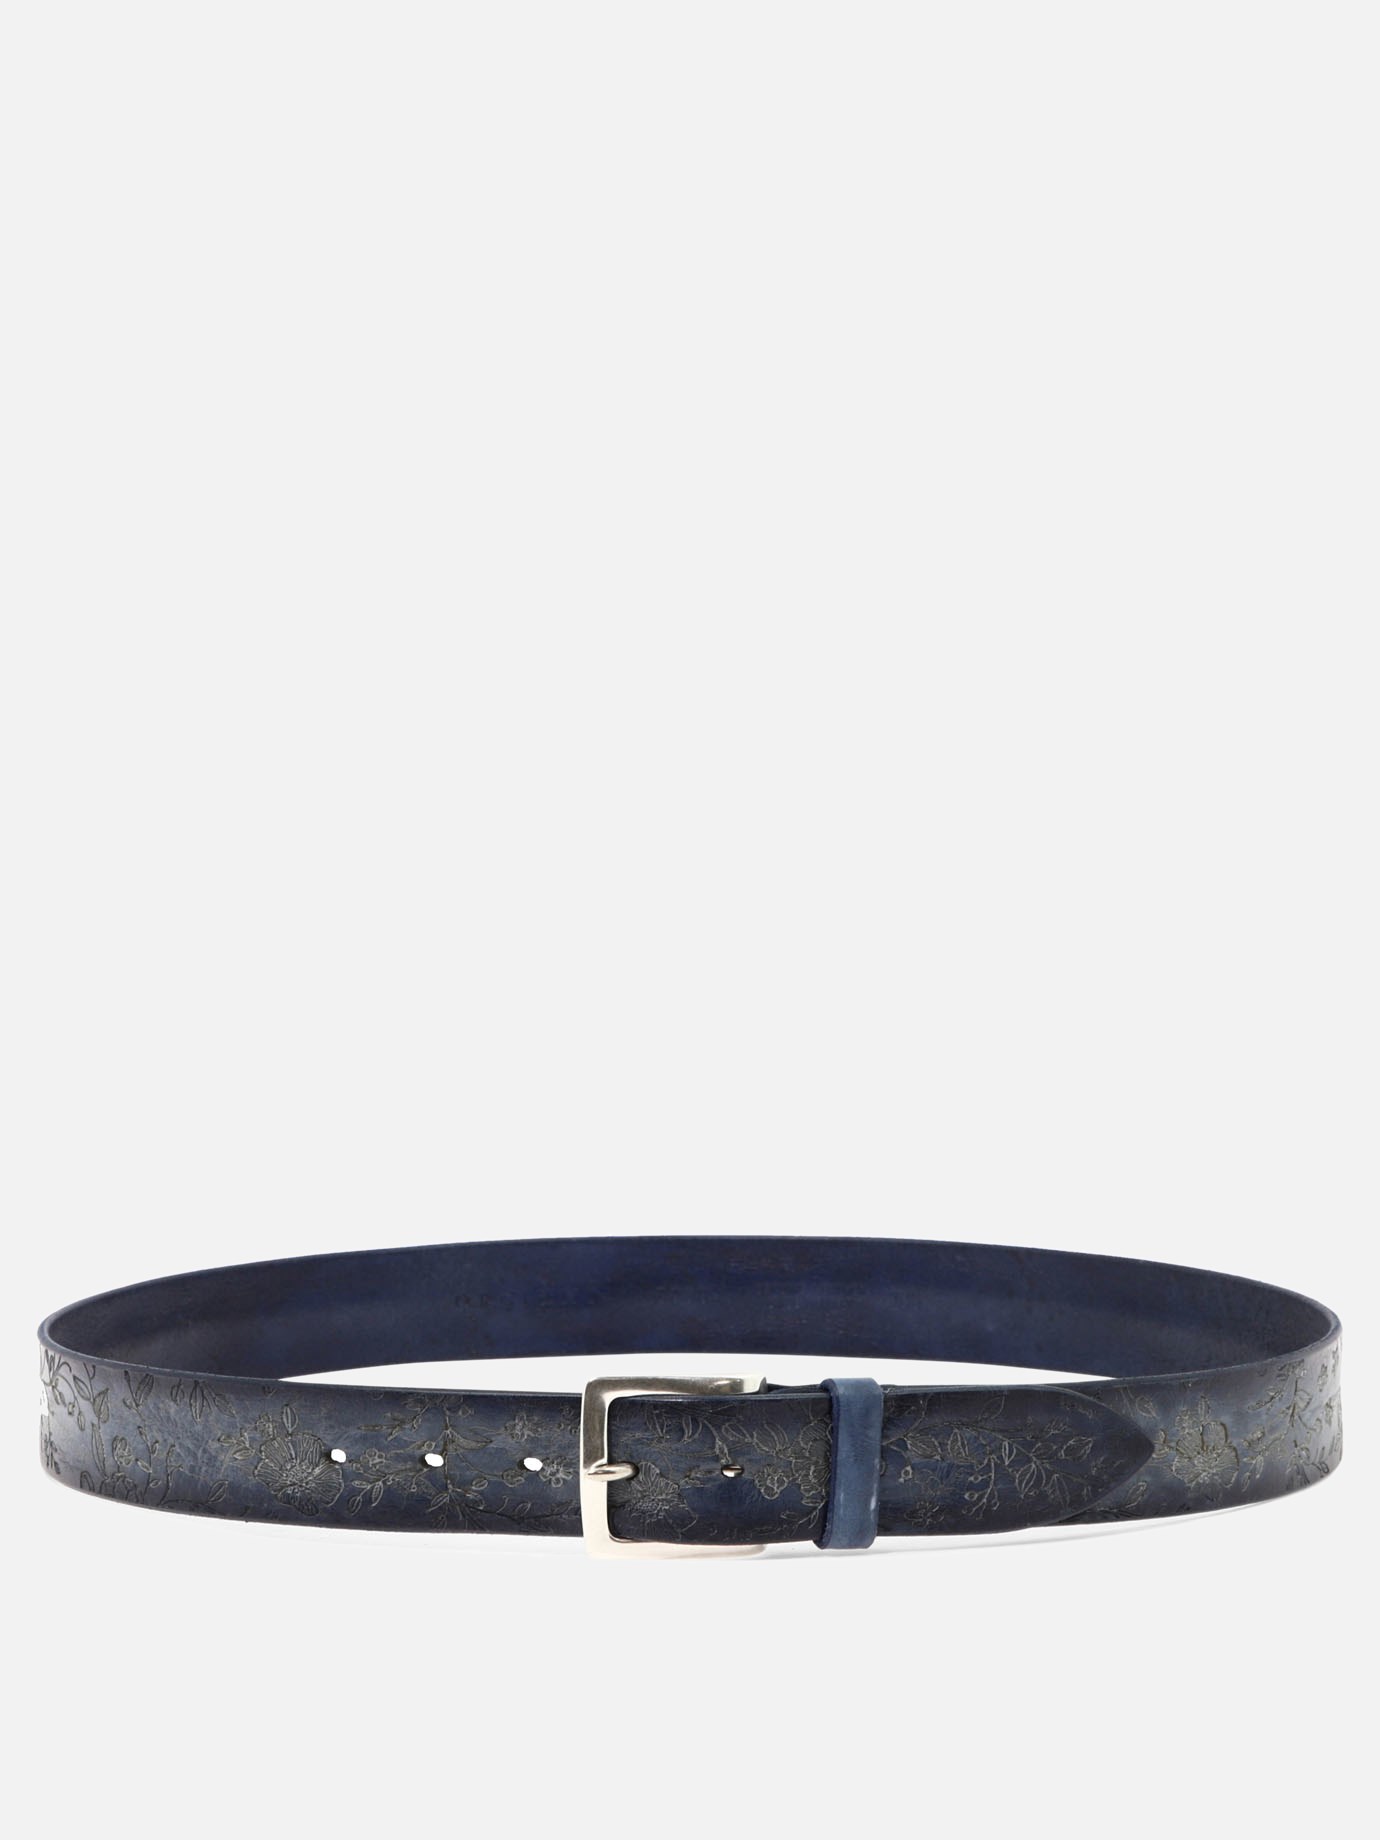  Stain Soapy  beltby Orciani - 4